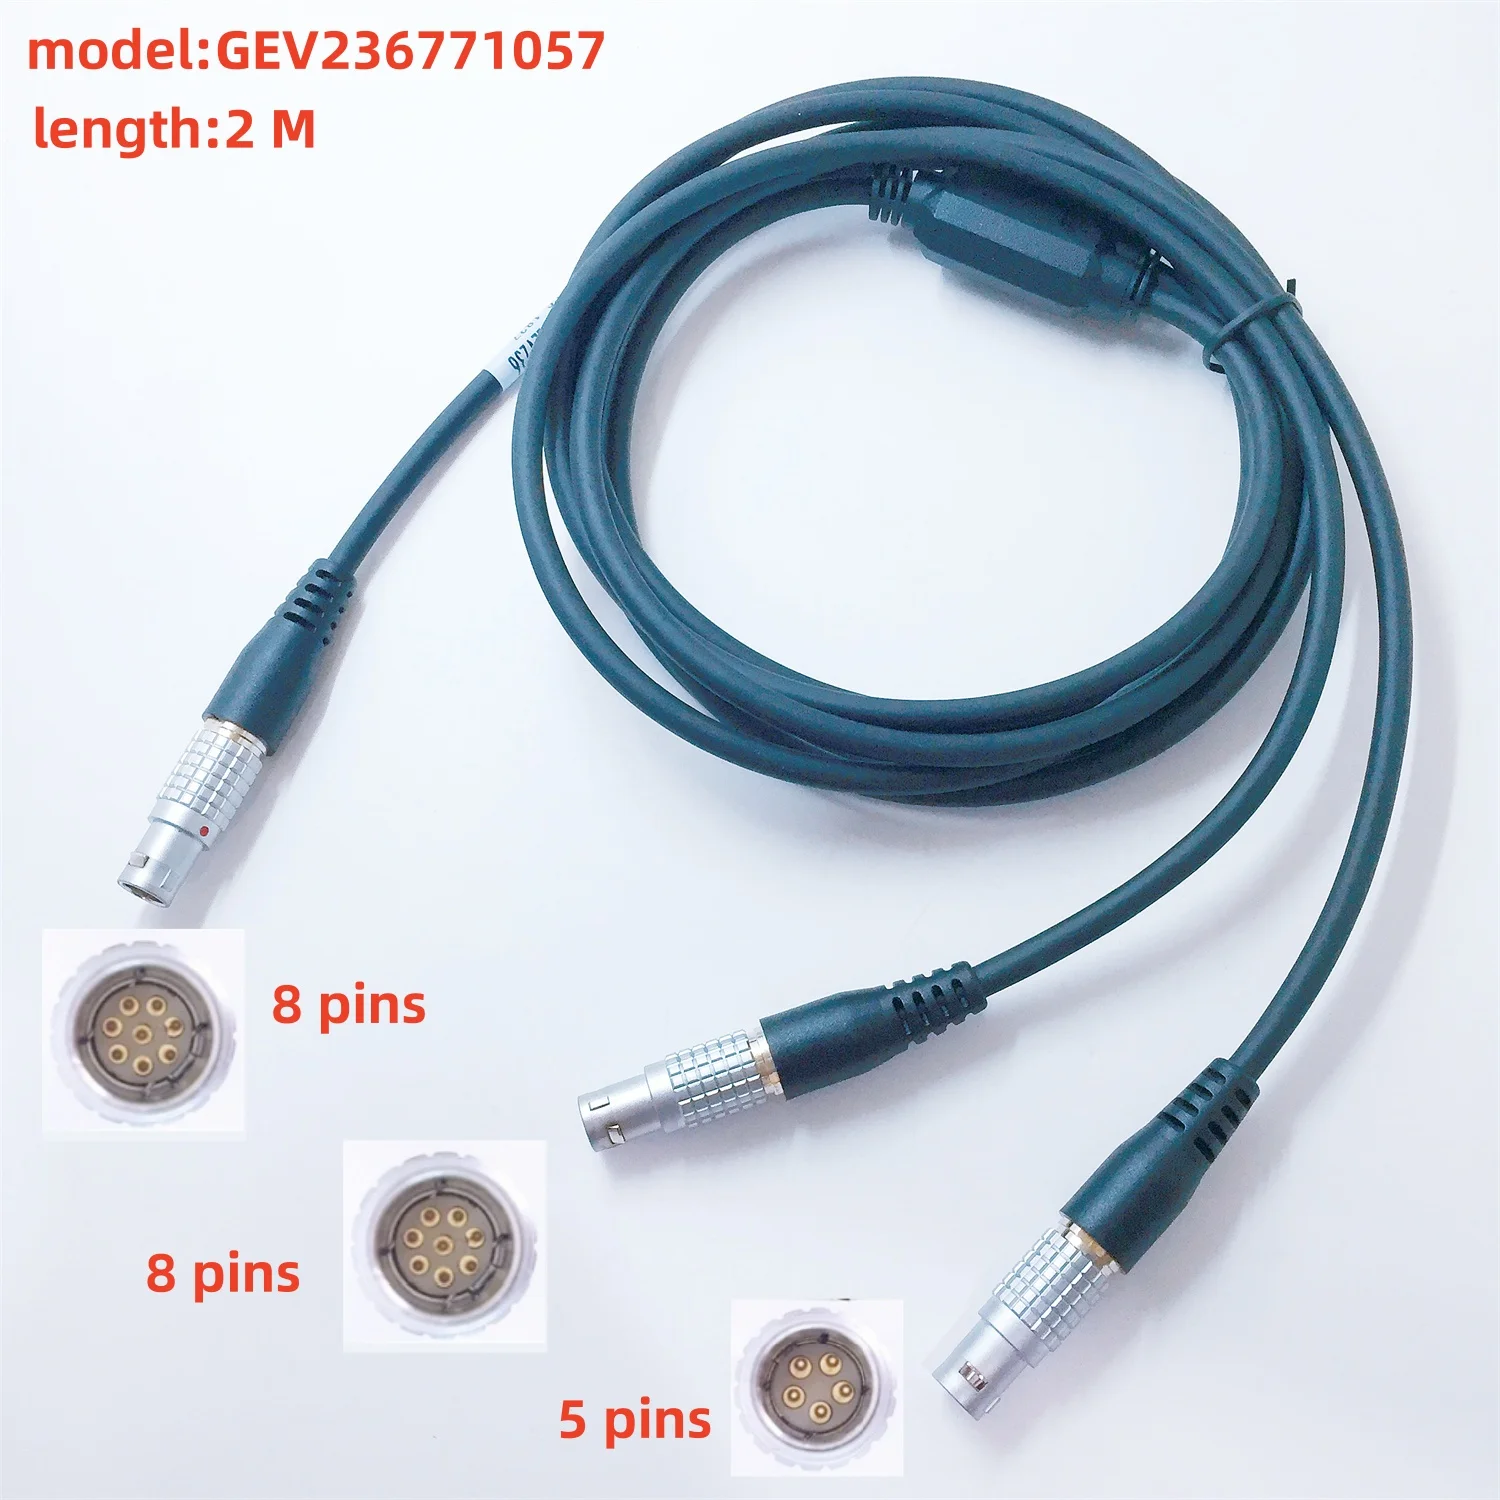 

NEW Brand Leica GEV236 771057 Y-Cable connects TM/TS50 TS60 MS50to TCPS30/29 radio & external battery GEB171/GEB371/373